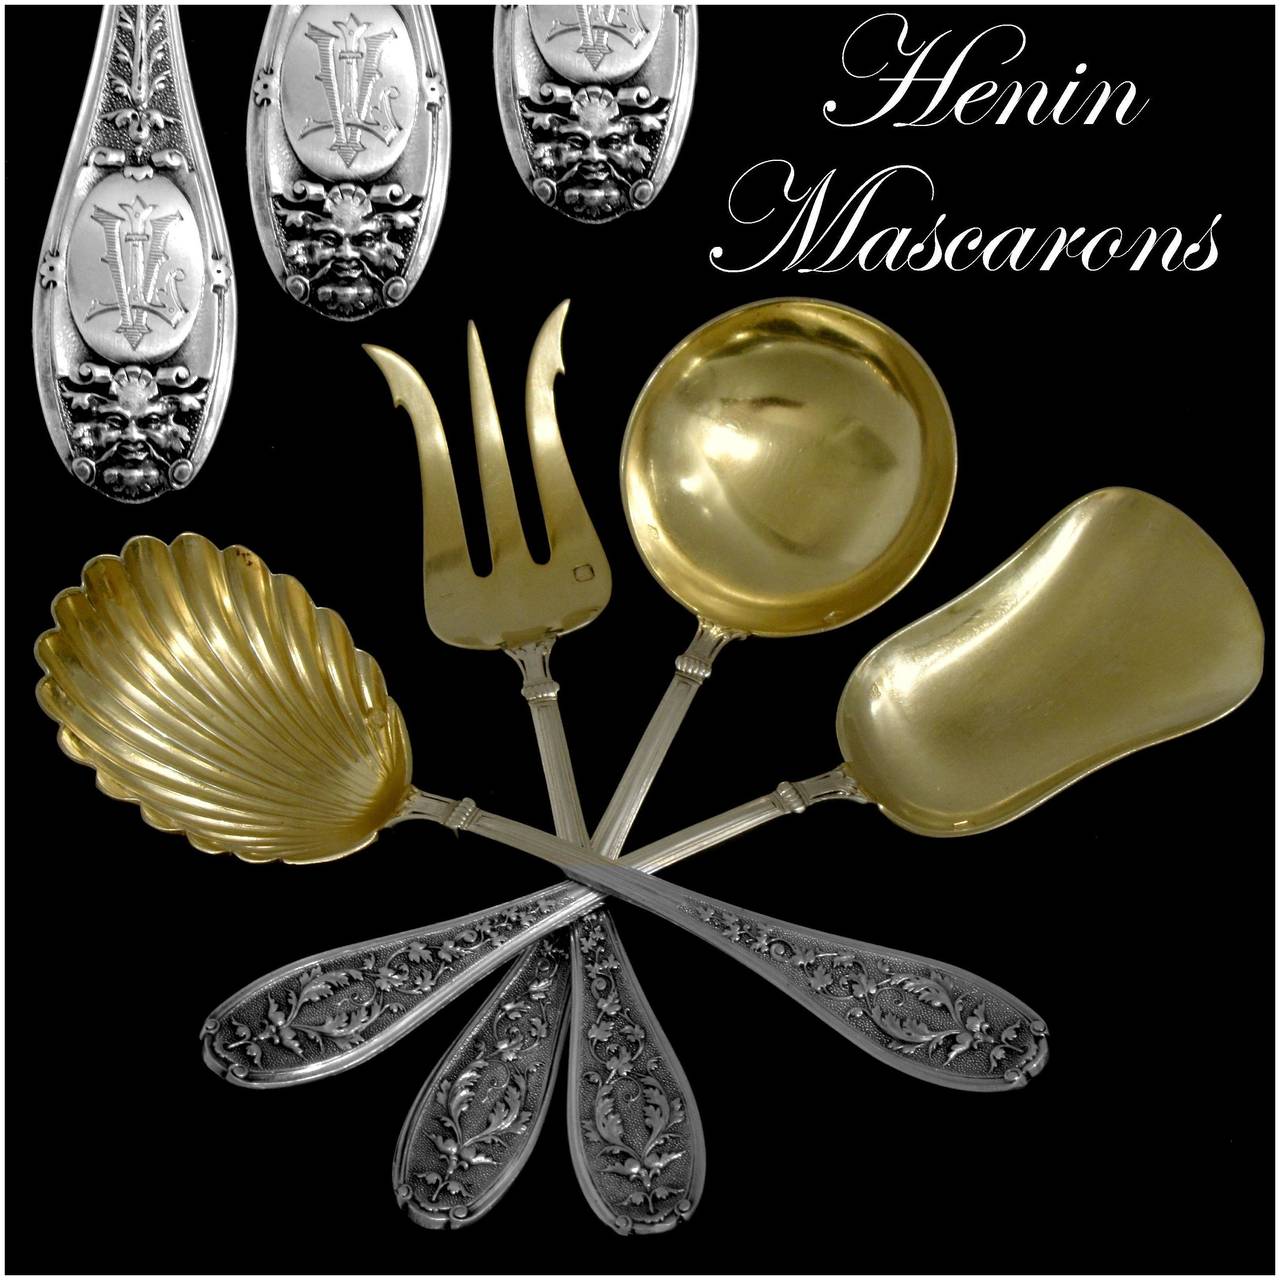 HENIN Fabulous French All Sterling Silver 18K Gold Dessert Set 4 pc Mascarons

Head of Minerve 1 st titre for 950/1000 French Sterling Silver Vermeil guarantee. The quality of the gold used to recover sterling silver is a minimum of 750 mils